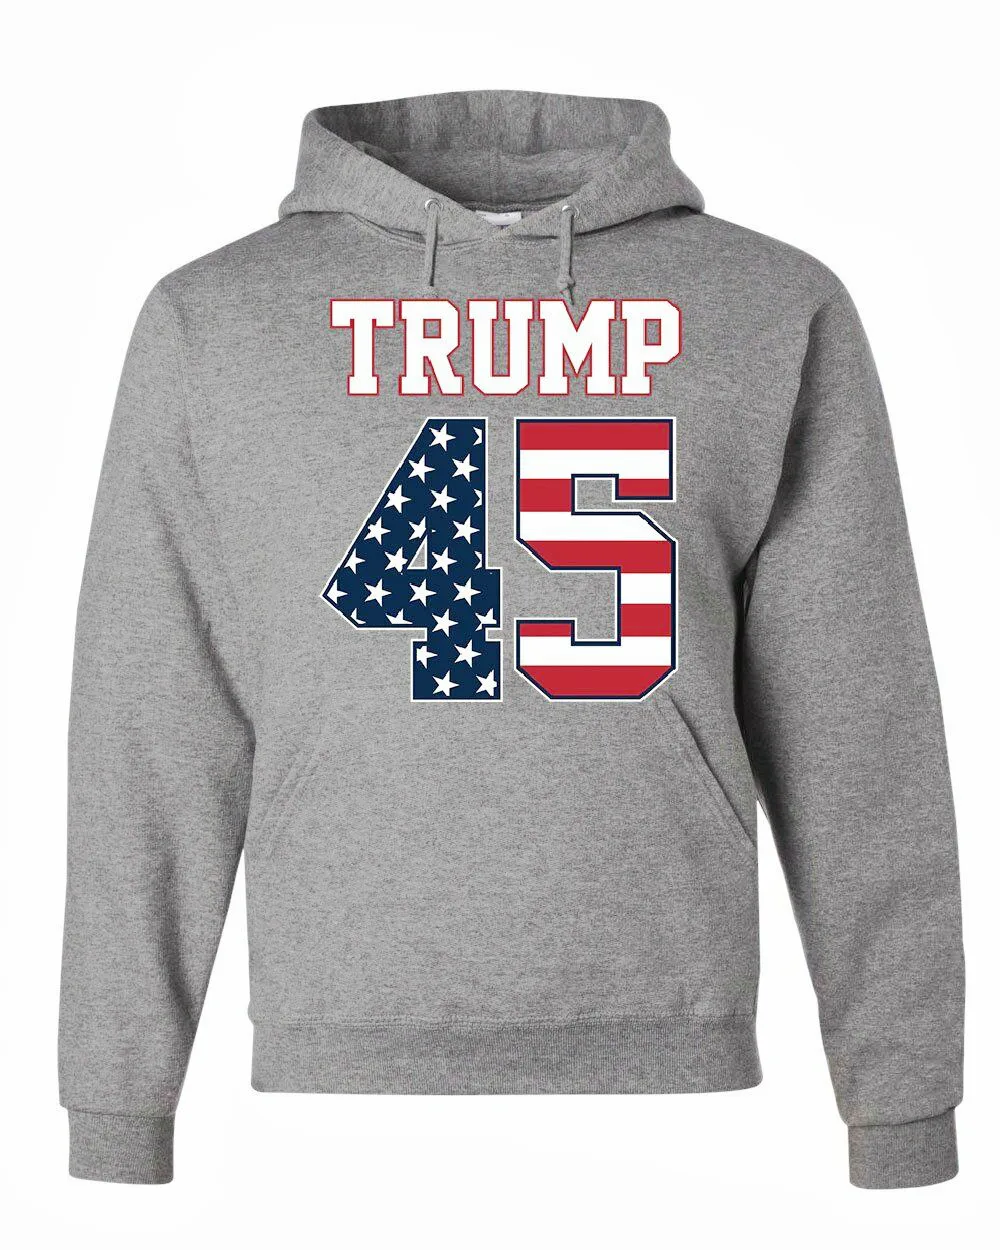 Trump 45 Sweatshirt The 45th President Political Stars and Stripes Sweater 